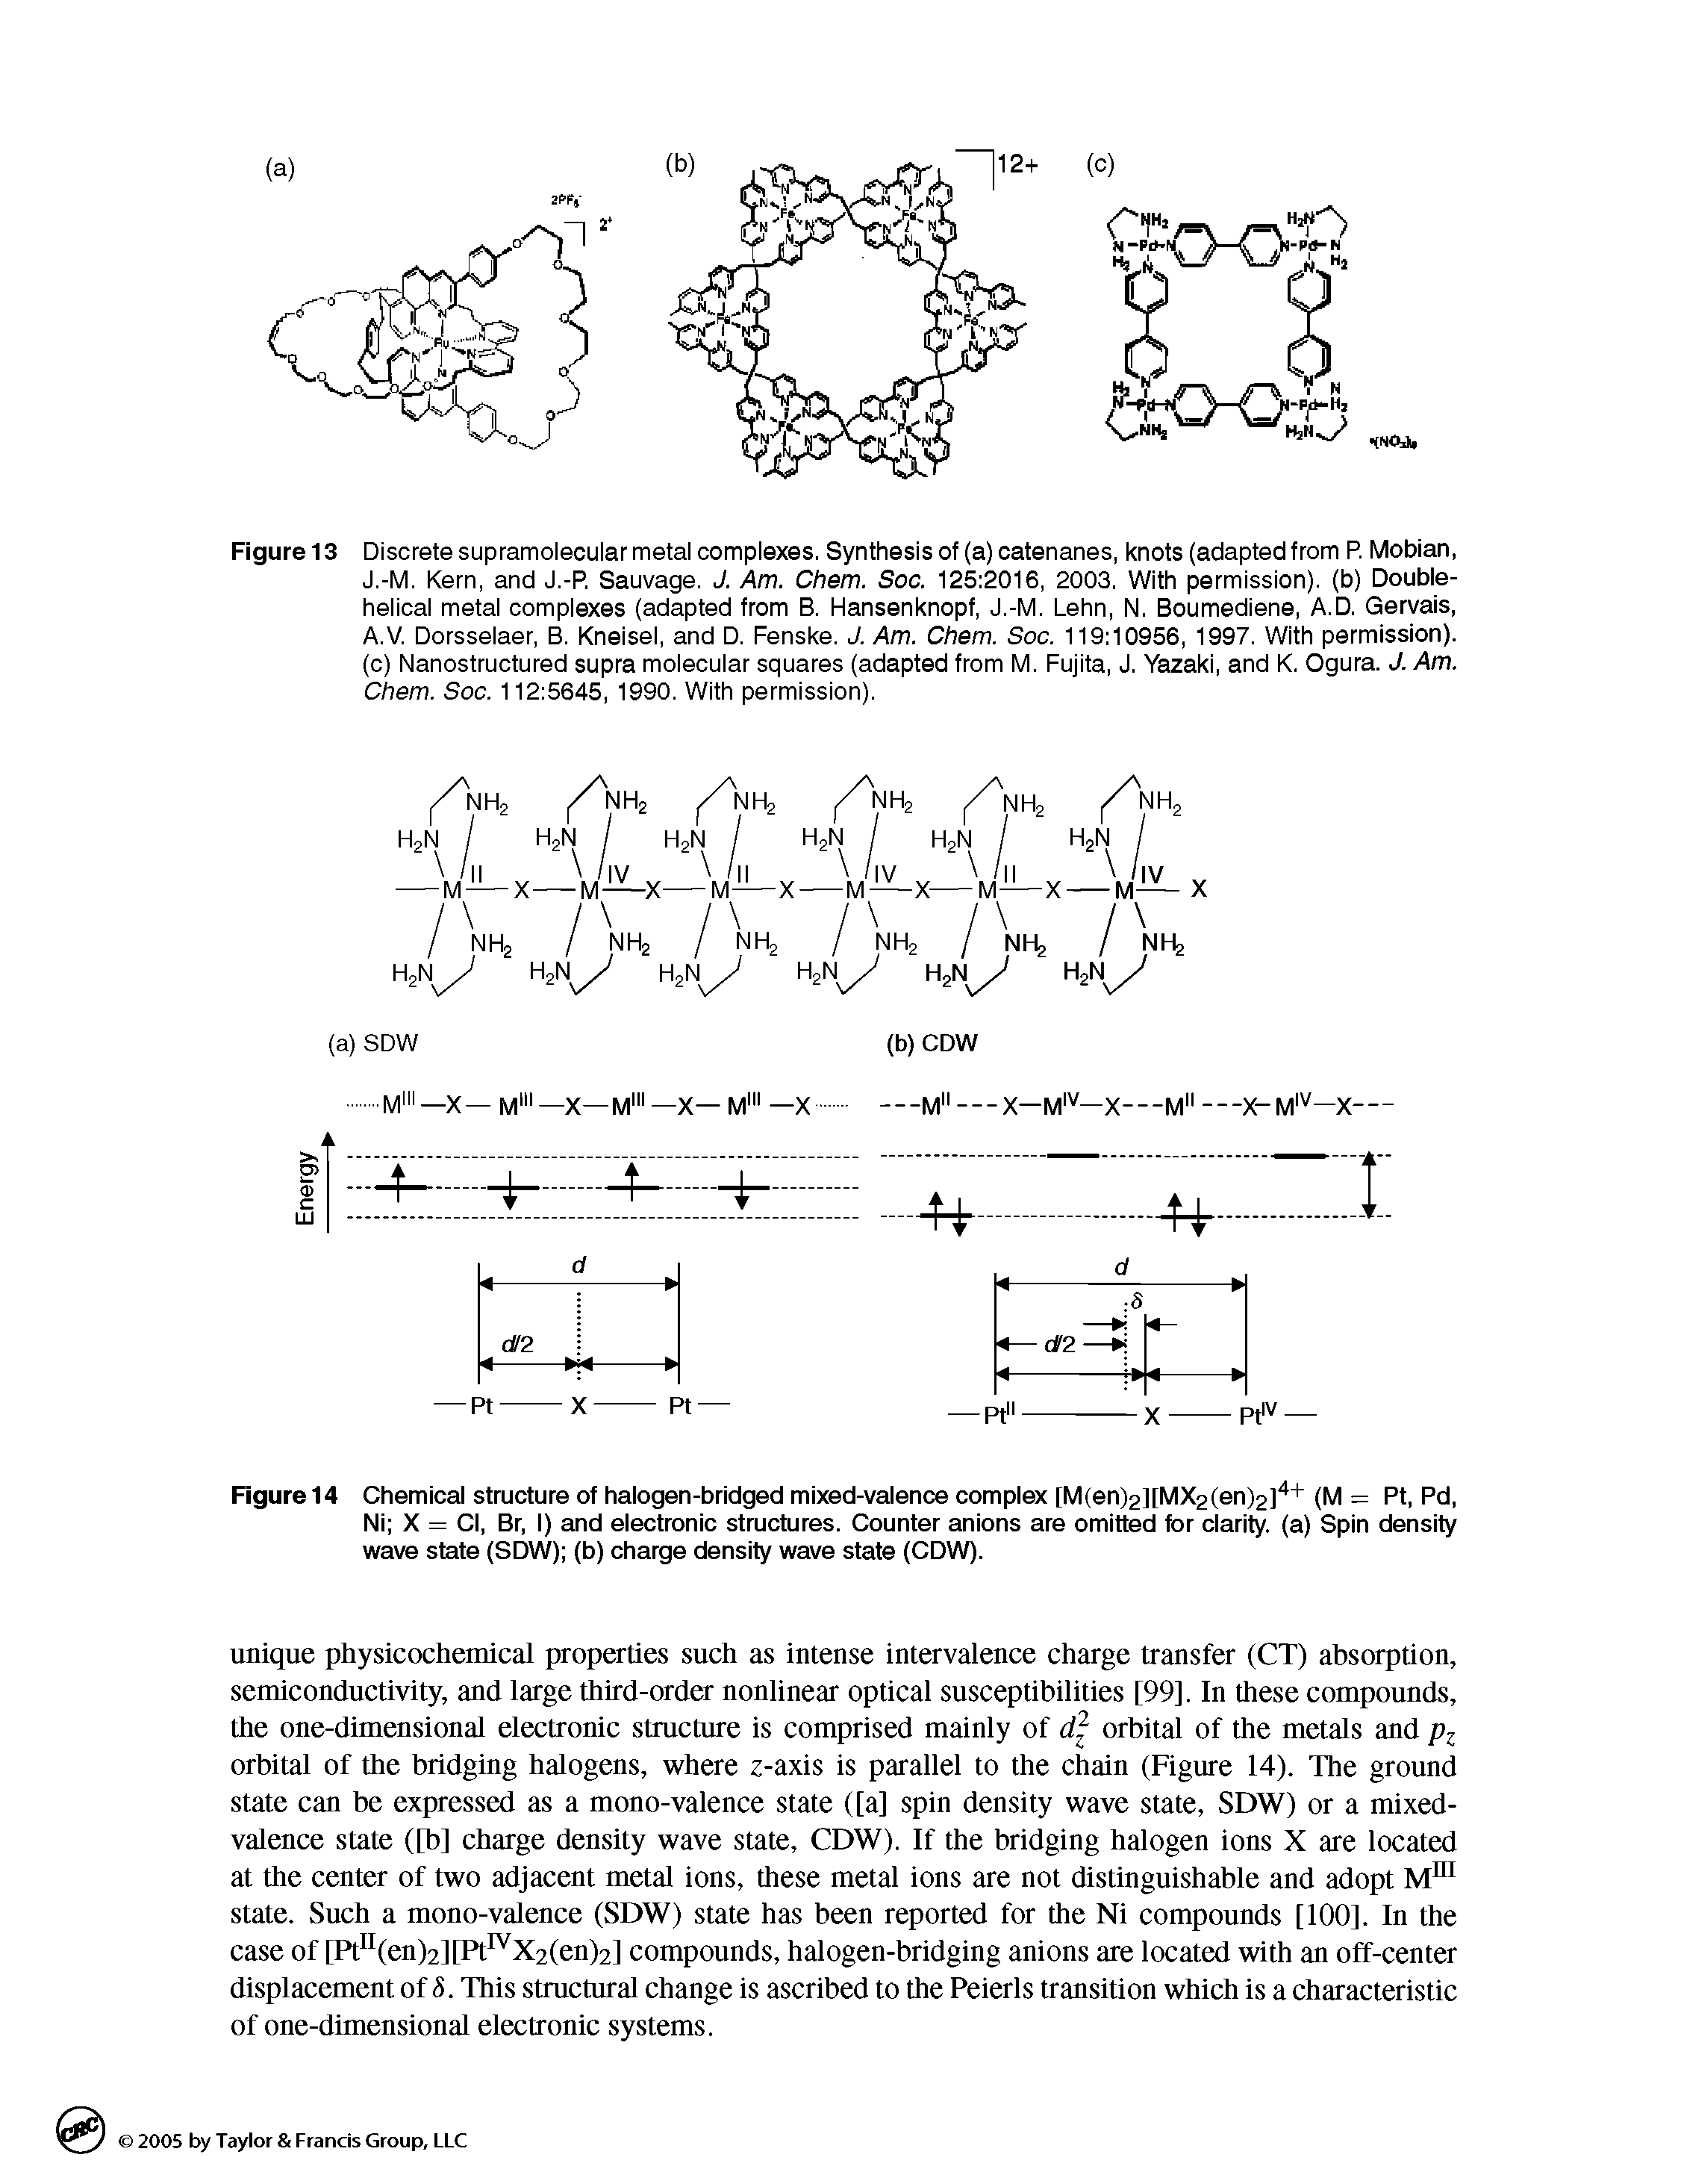 Figure 14 Chemical structure of halogen-bridged mixed-valence complex [M(en)2][MX2(en)2) + (M = Pt, Pd, Ni X = Cl, Br, I) and electronic structures. Counter anions are omitted for clarity, (a) Spin density wave state (SDW) (b) charge density wave state (CDW).